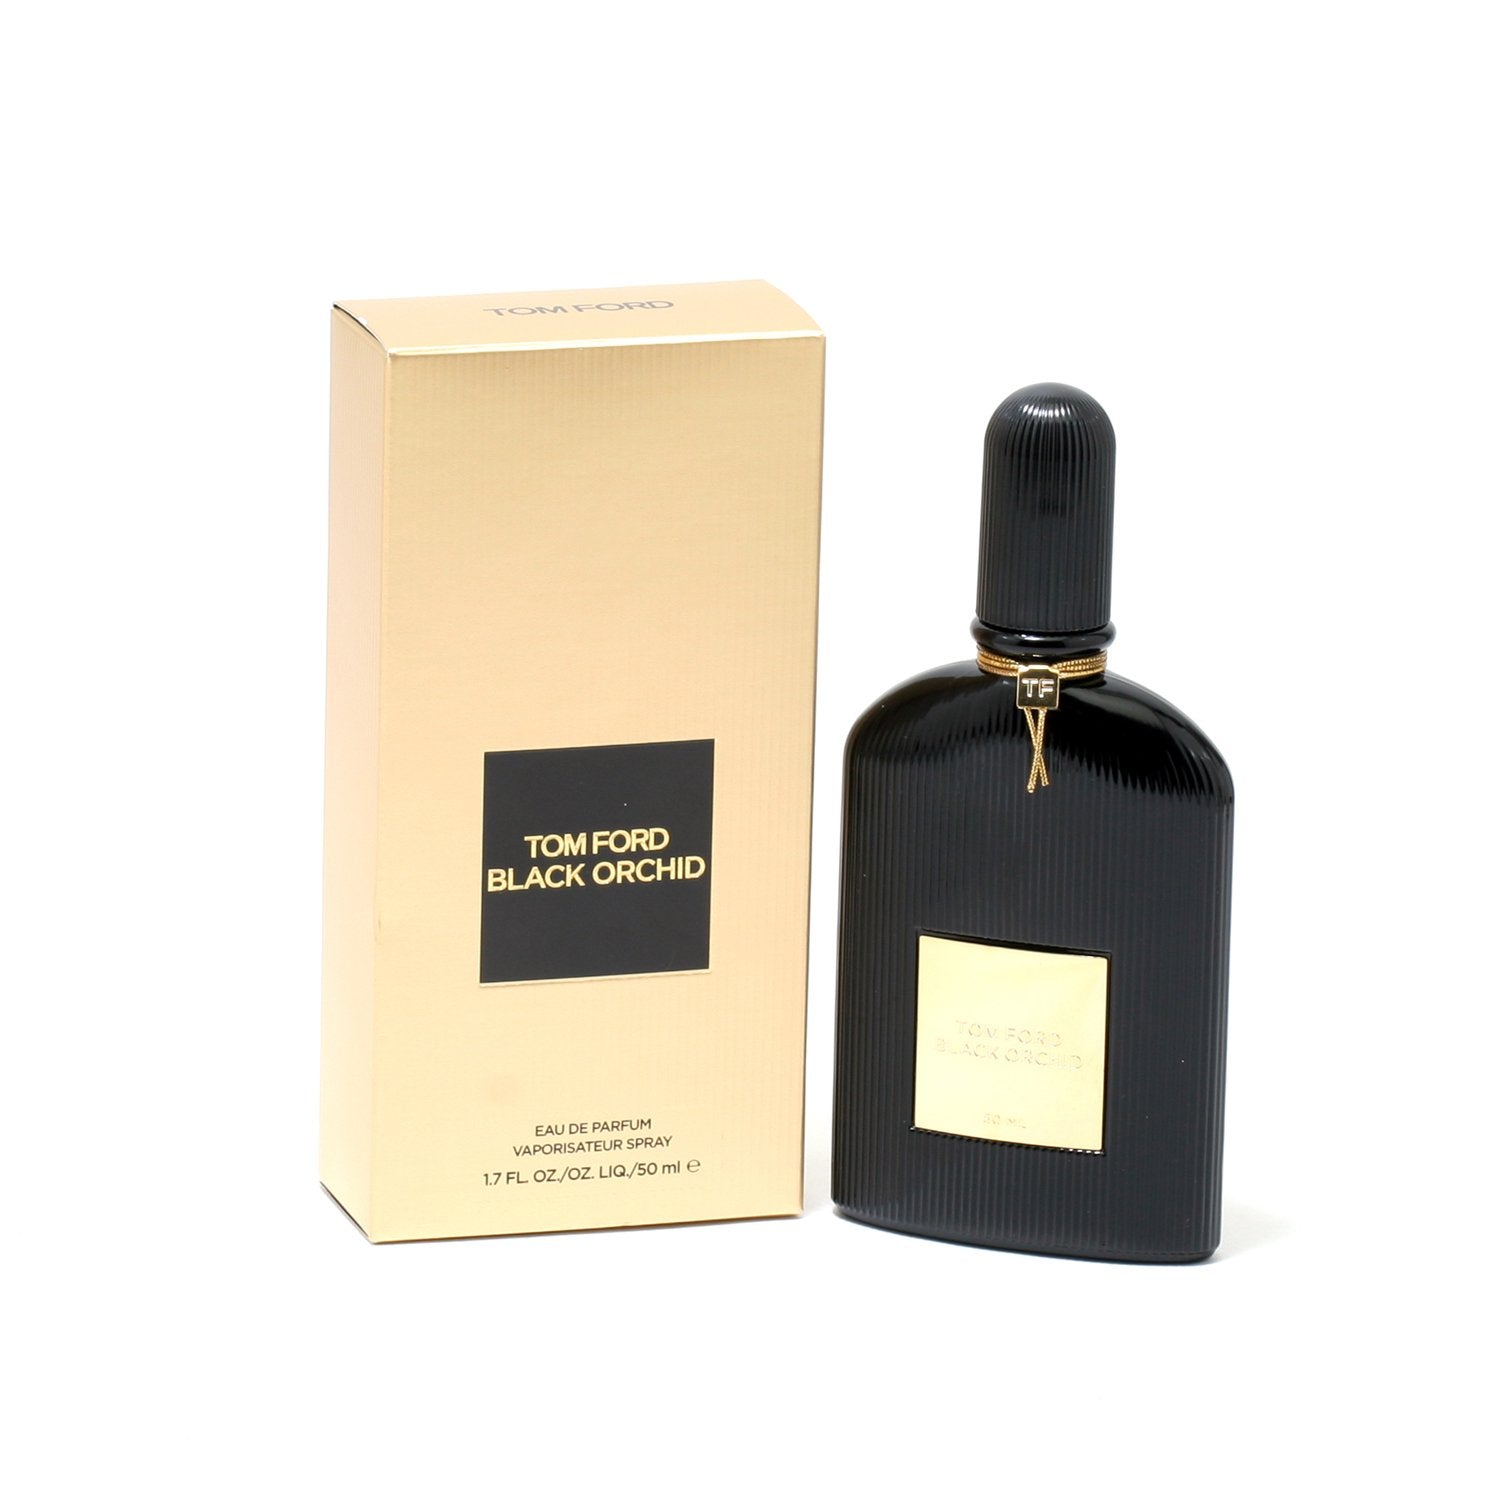  Tom Ford Black Orchid By Tom Ford For Women. Eau De